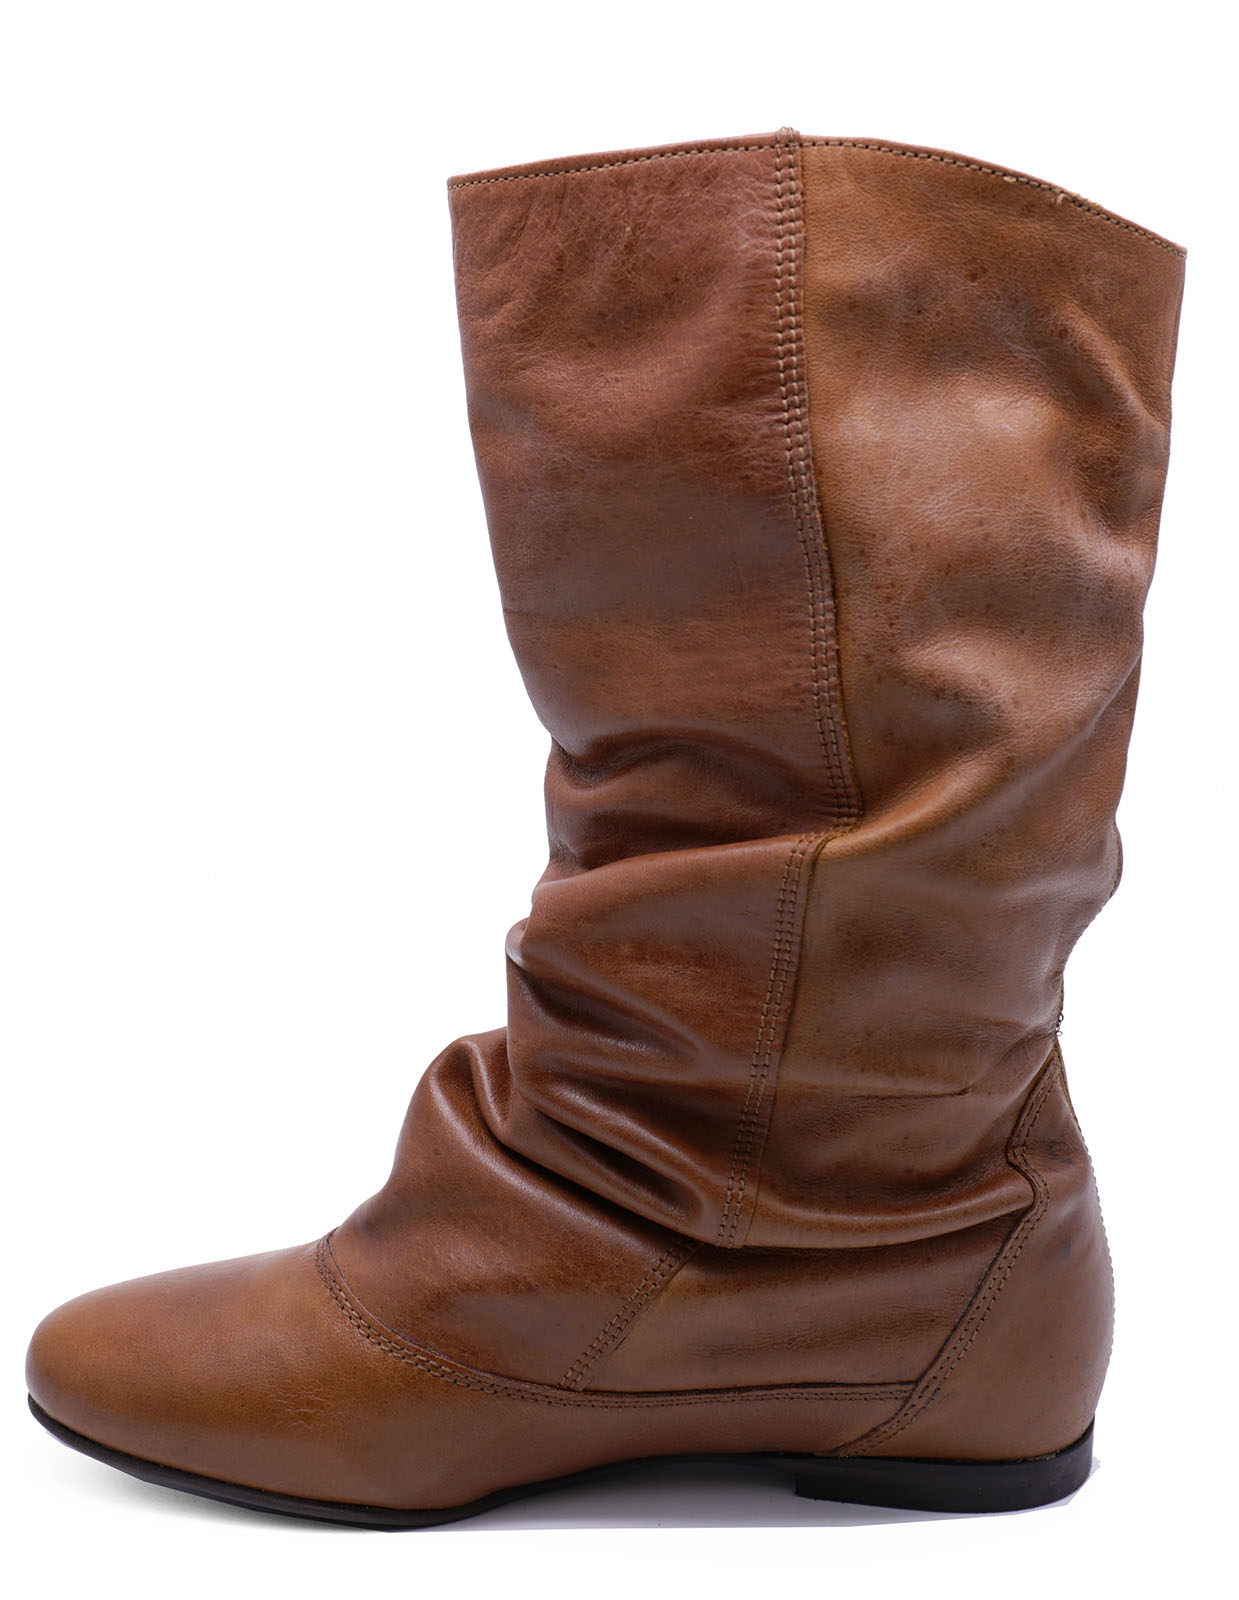 leather tan boots ladies